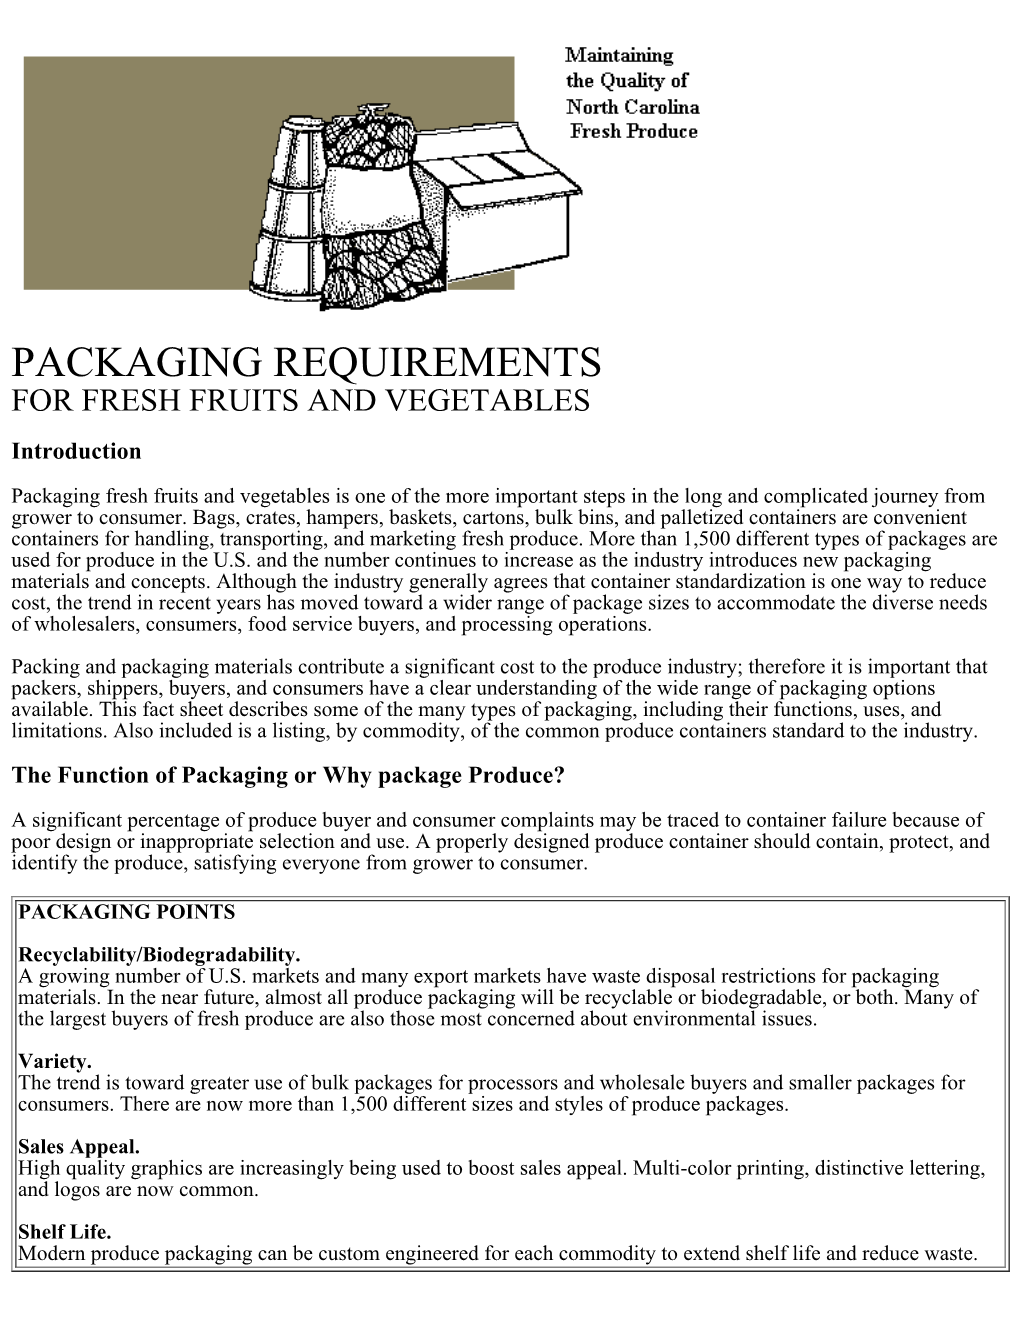 PACKAGING REQUIREMENTS for FRESH FRUITS and VEGETABLES Introduction